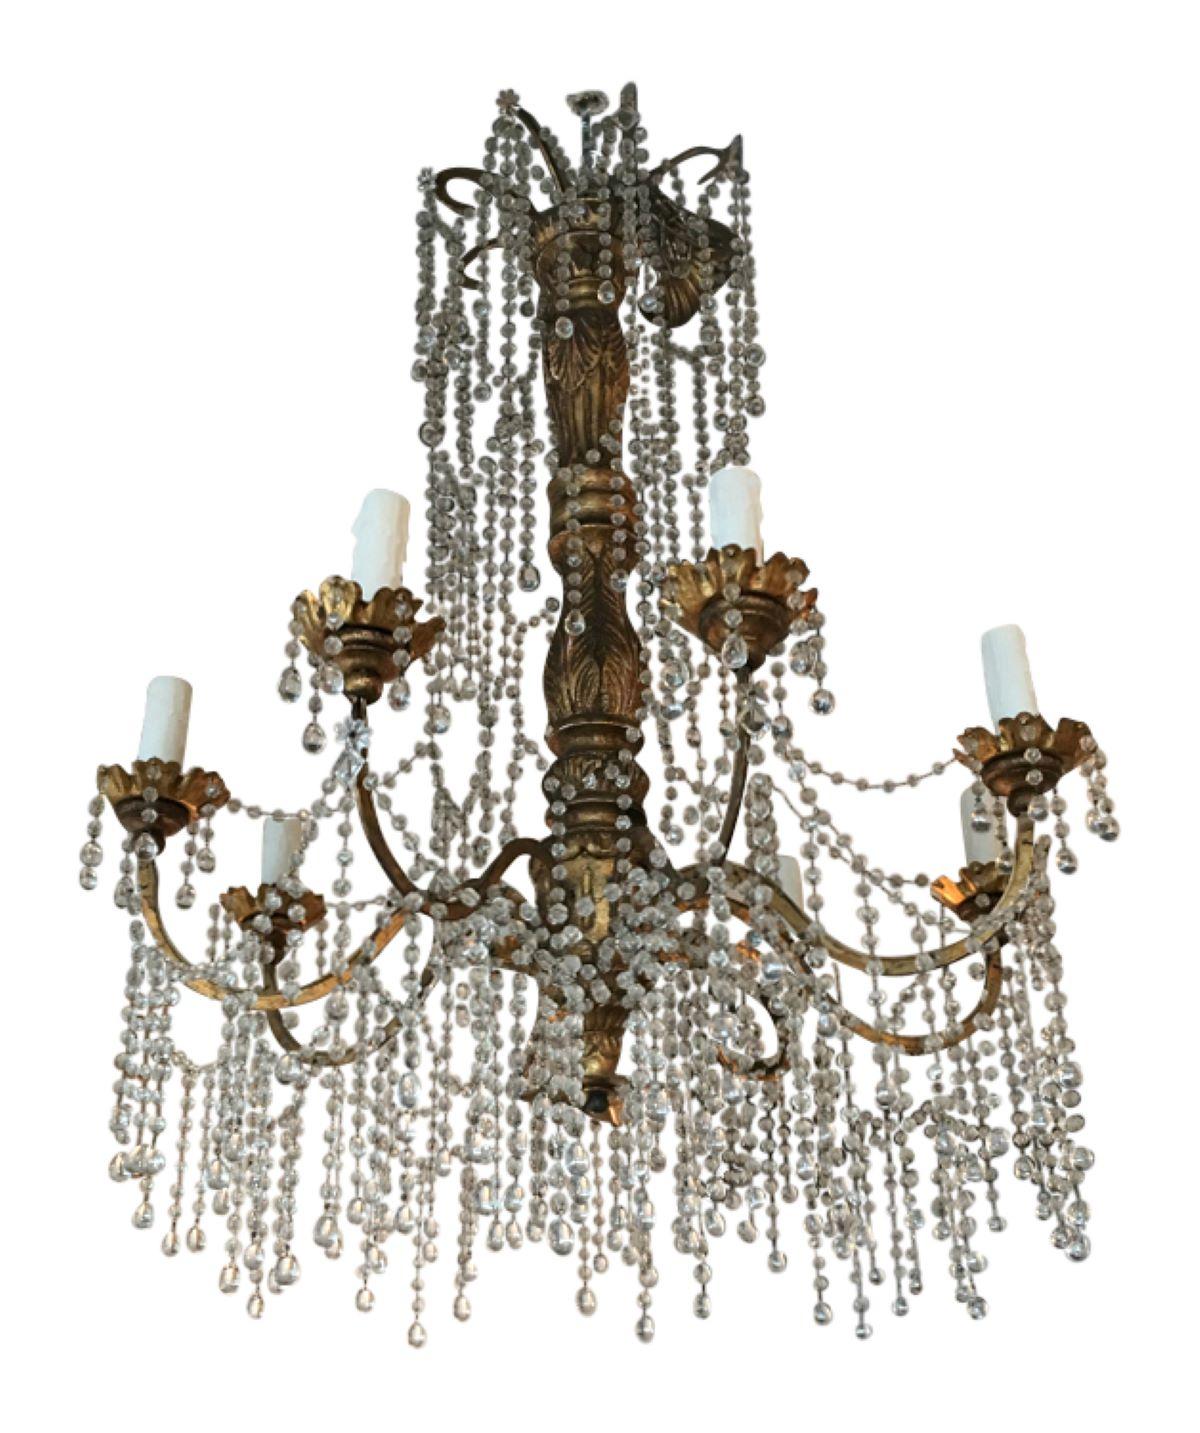 Genovese giltwood chandelier from the early 1900's. Stunning craftsmanship with delicate crystals strung throughout the giltwood base. This chandelier screams elegance and is truly a timeless investment.